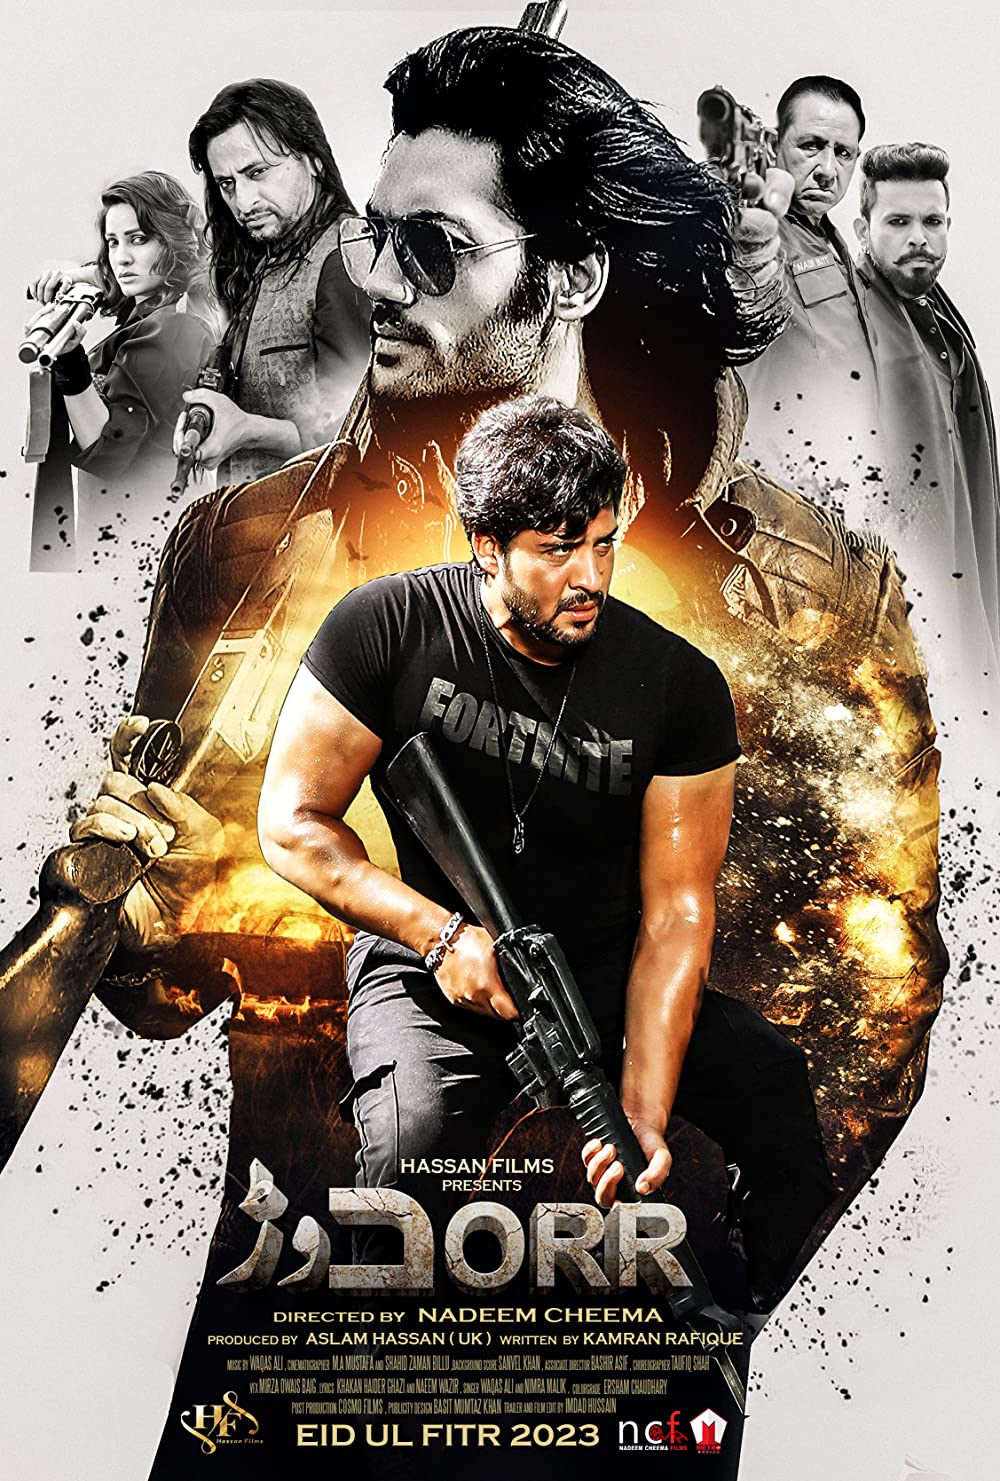 Dorr Movie (2023) Cast, Release Date, Story, Budget, Collection, Poster, Trailer, Review